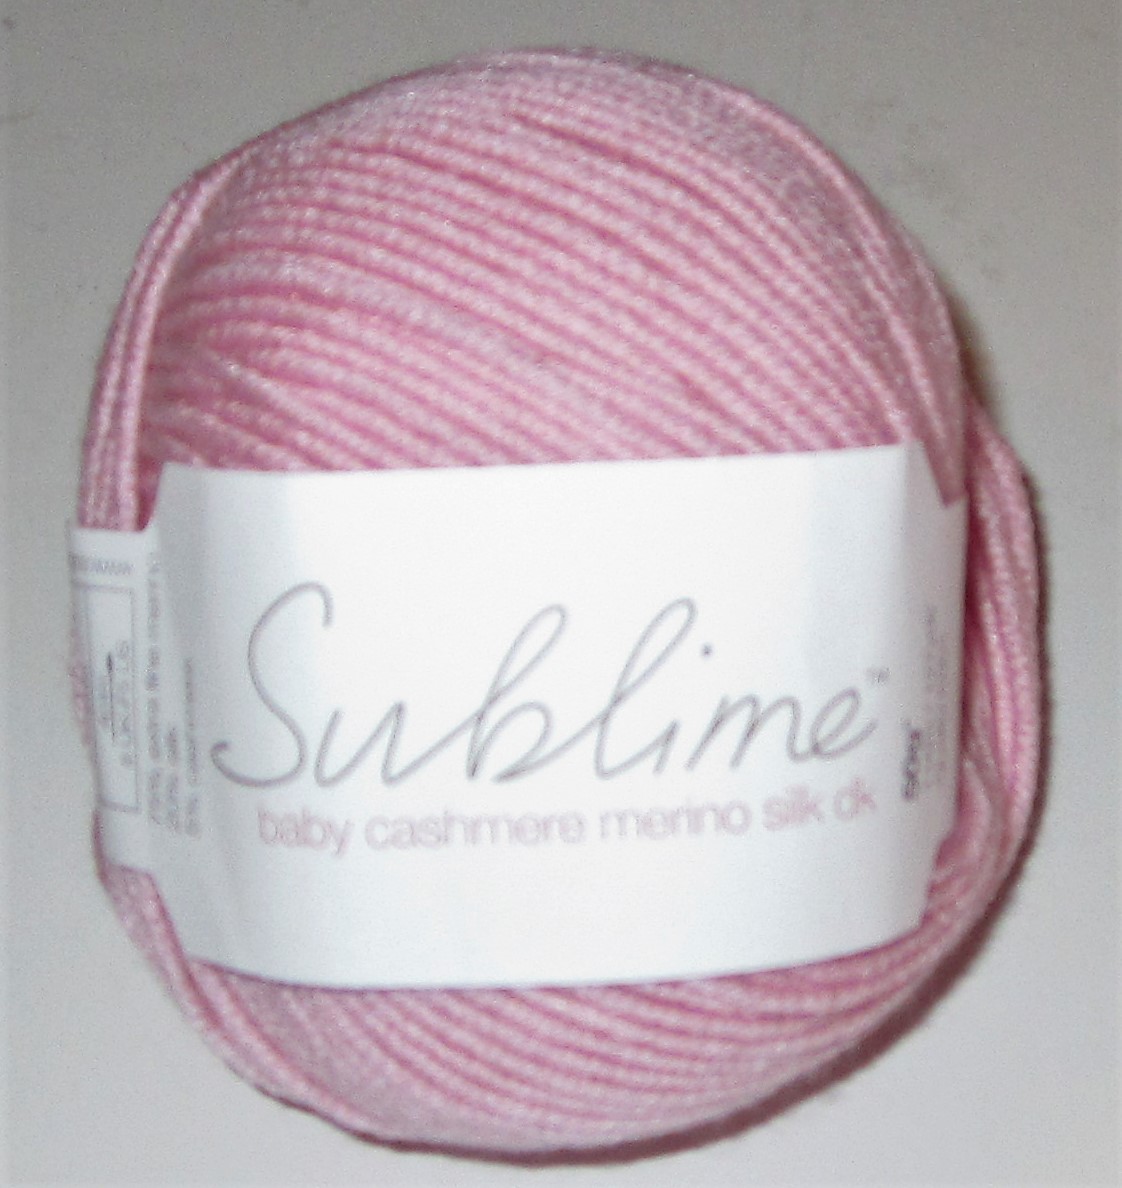 Sublime Baby Cashmere Merino Silk DK 121 Mousse